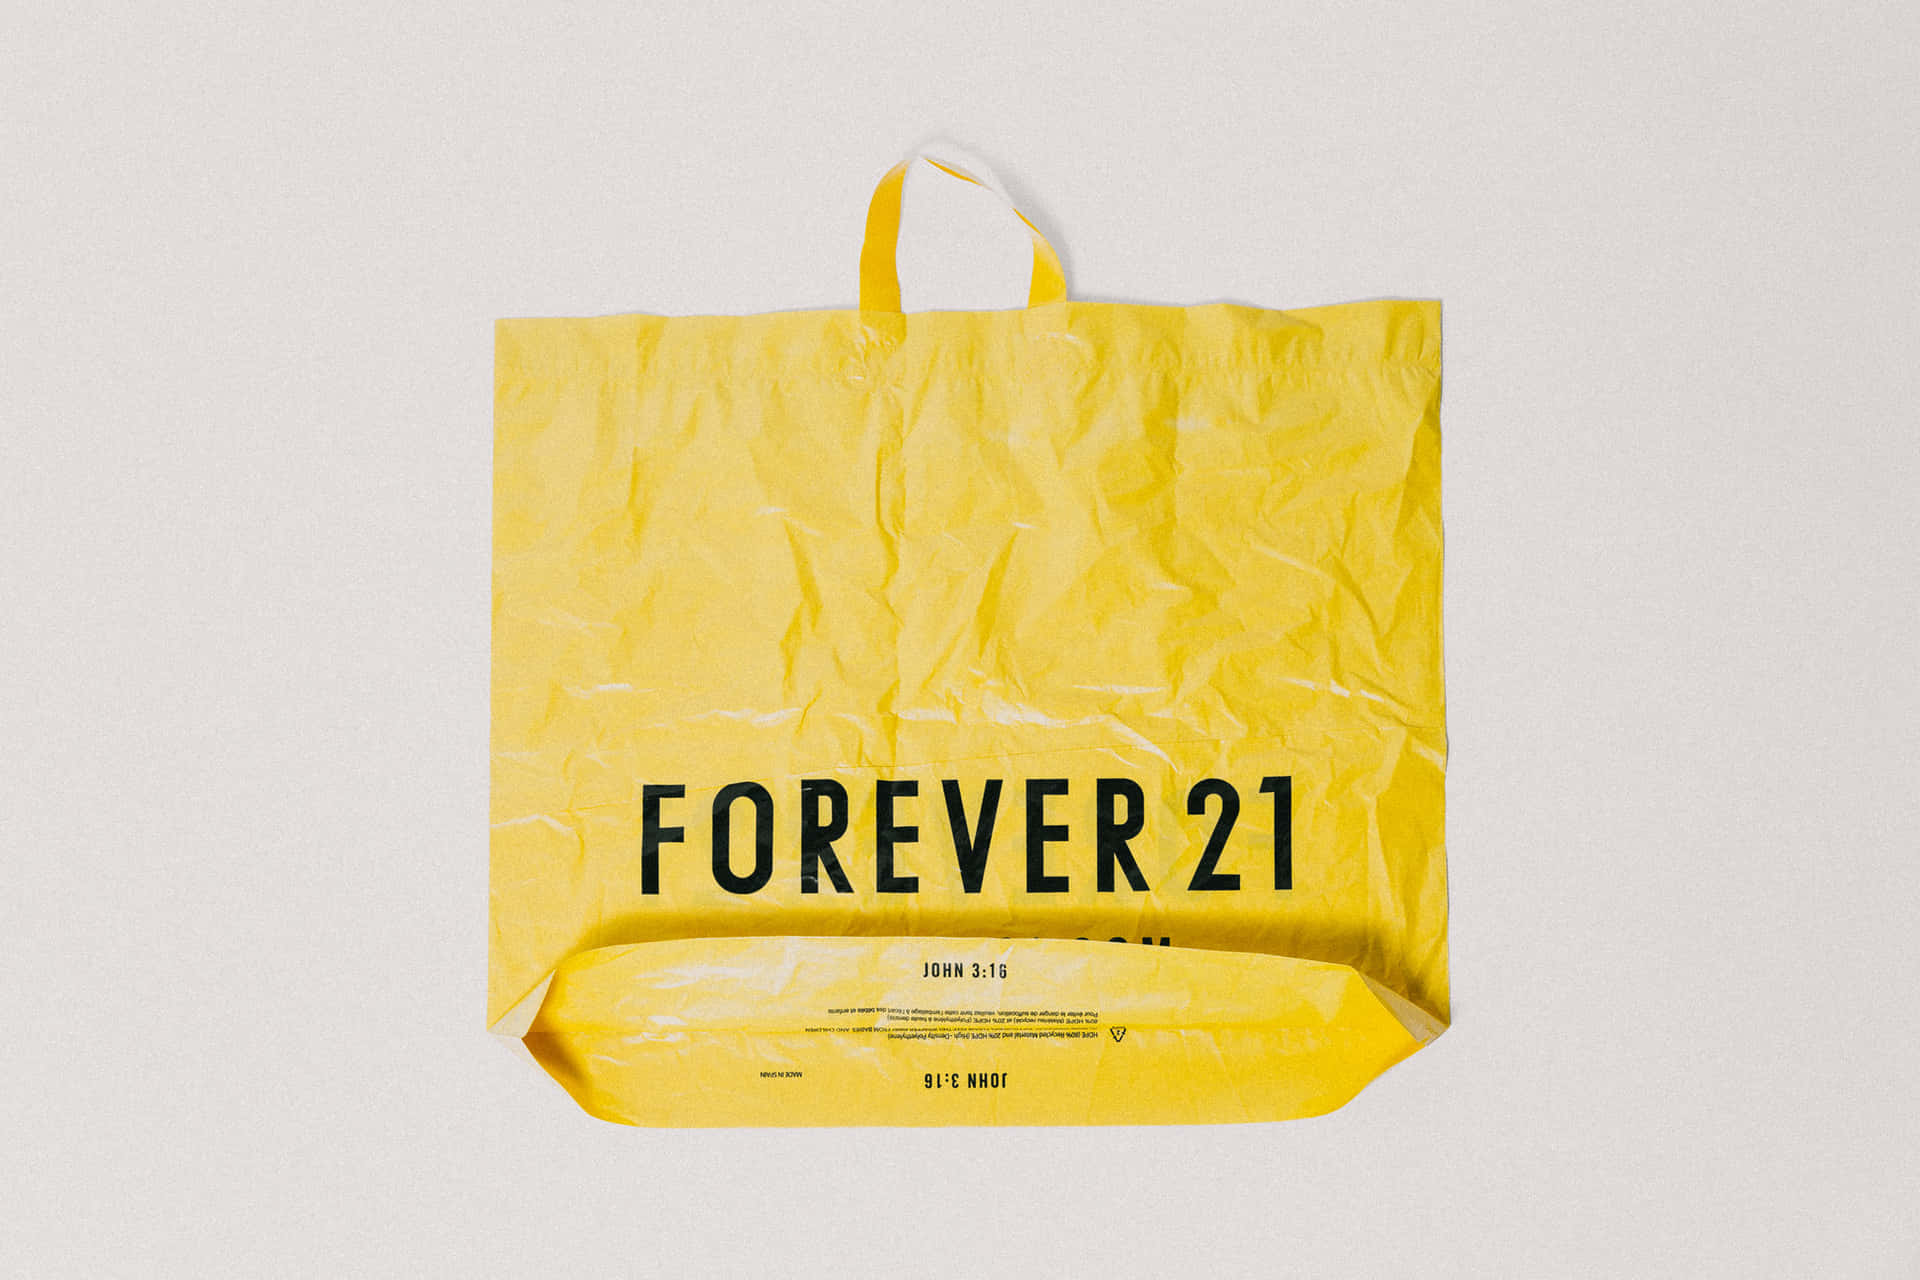 Express yourself with stylish clothing for any occasion from Forever 21